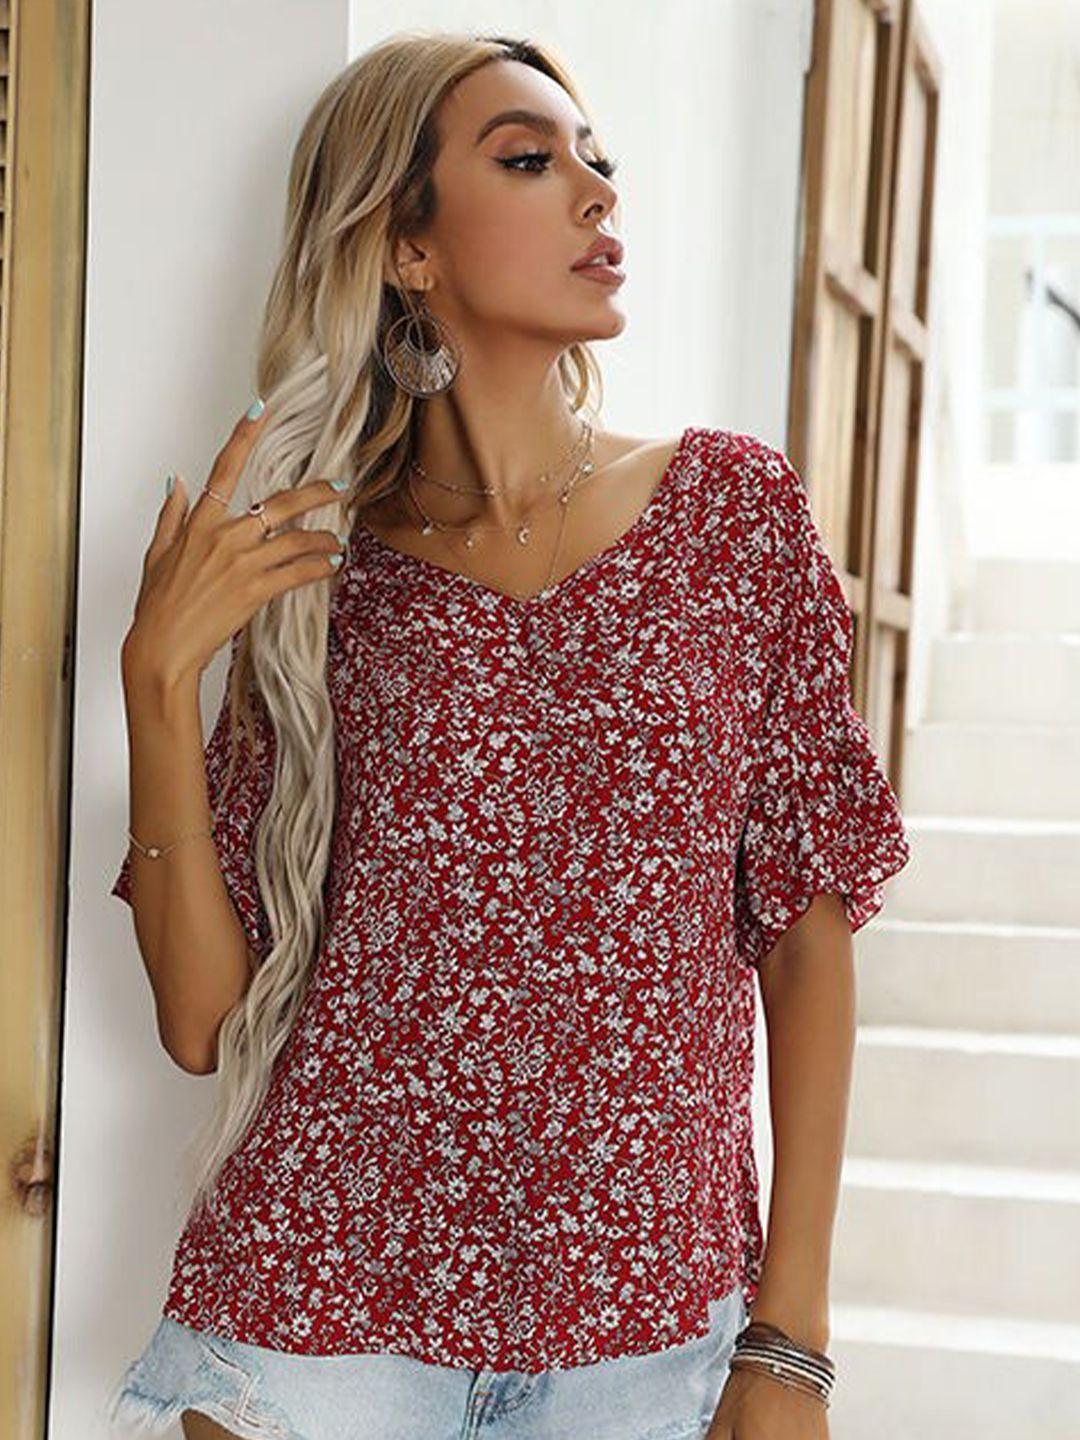 stylecast red floral printed v-neck cotton top